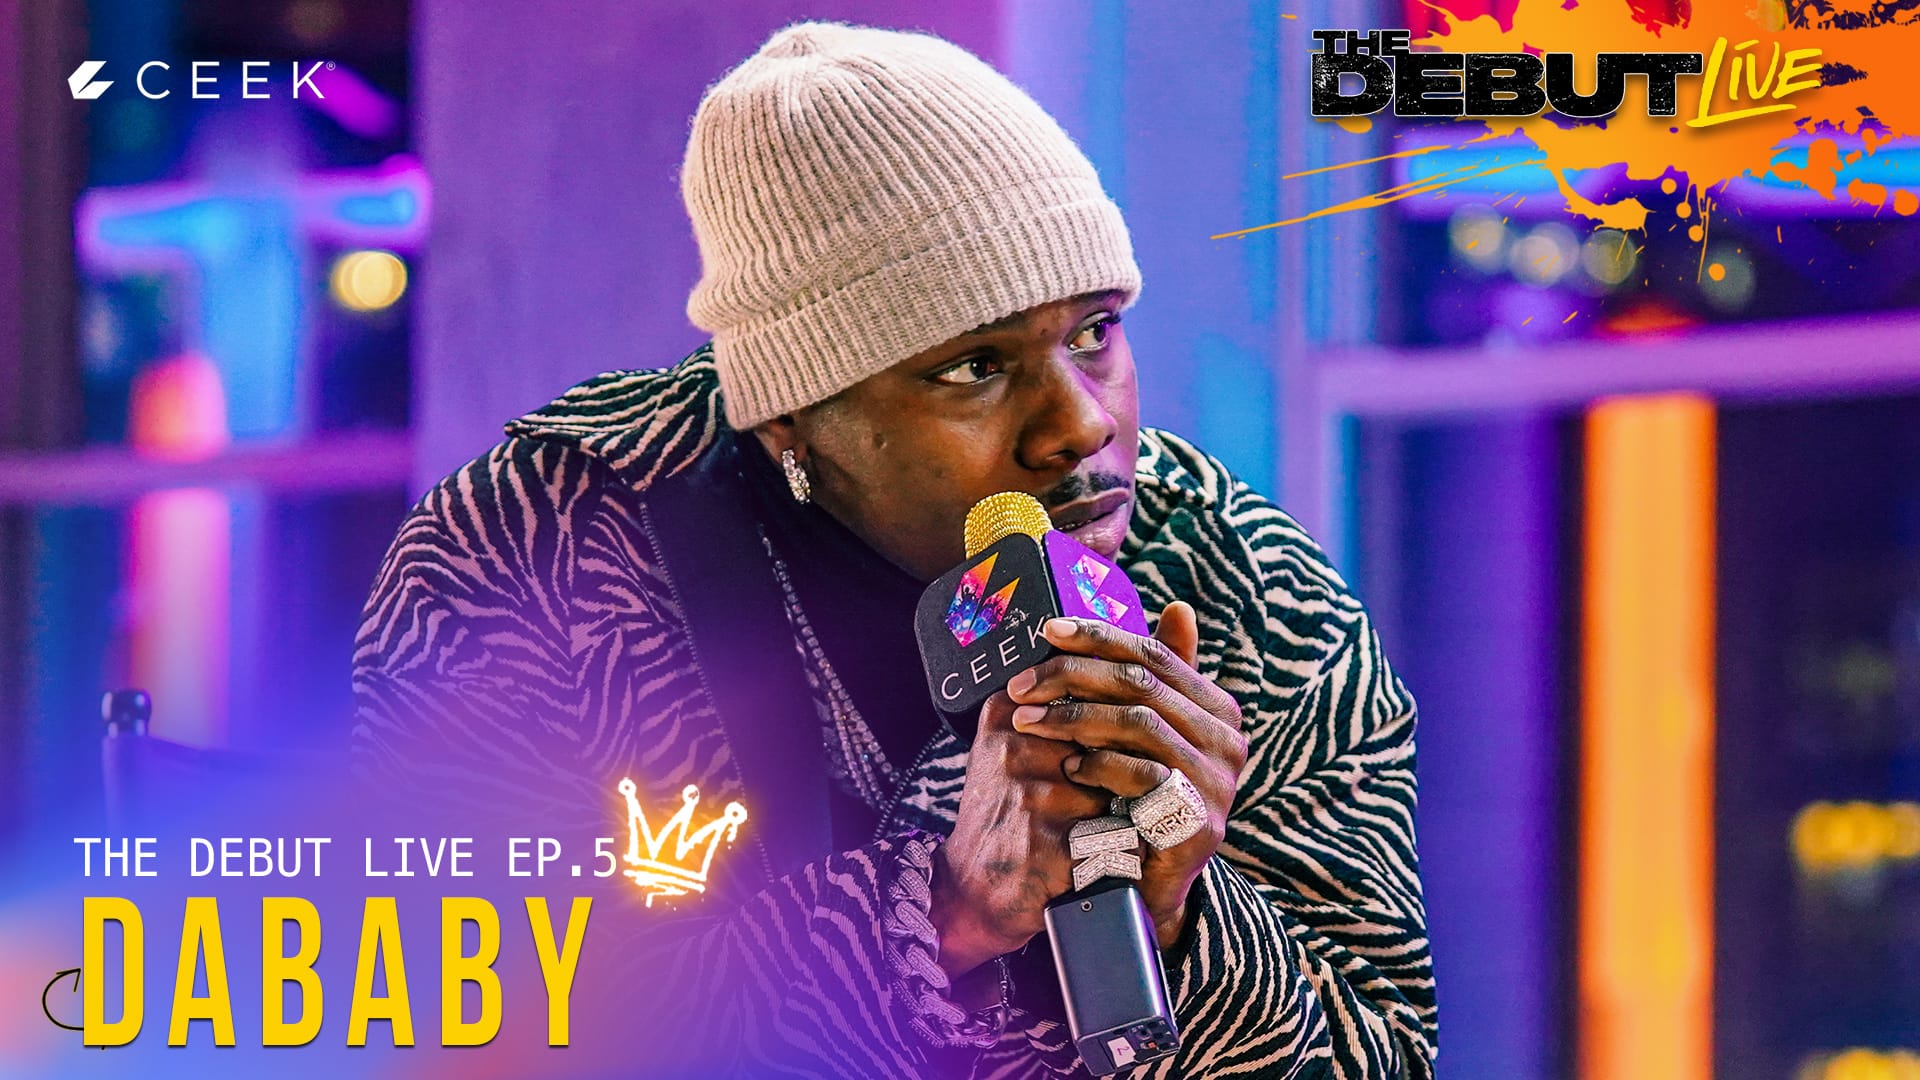 The Debut Live Ep5 ft DaBaby ceek.com